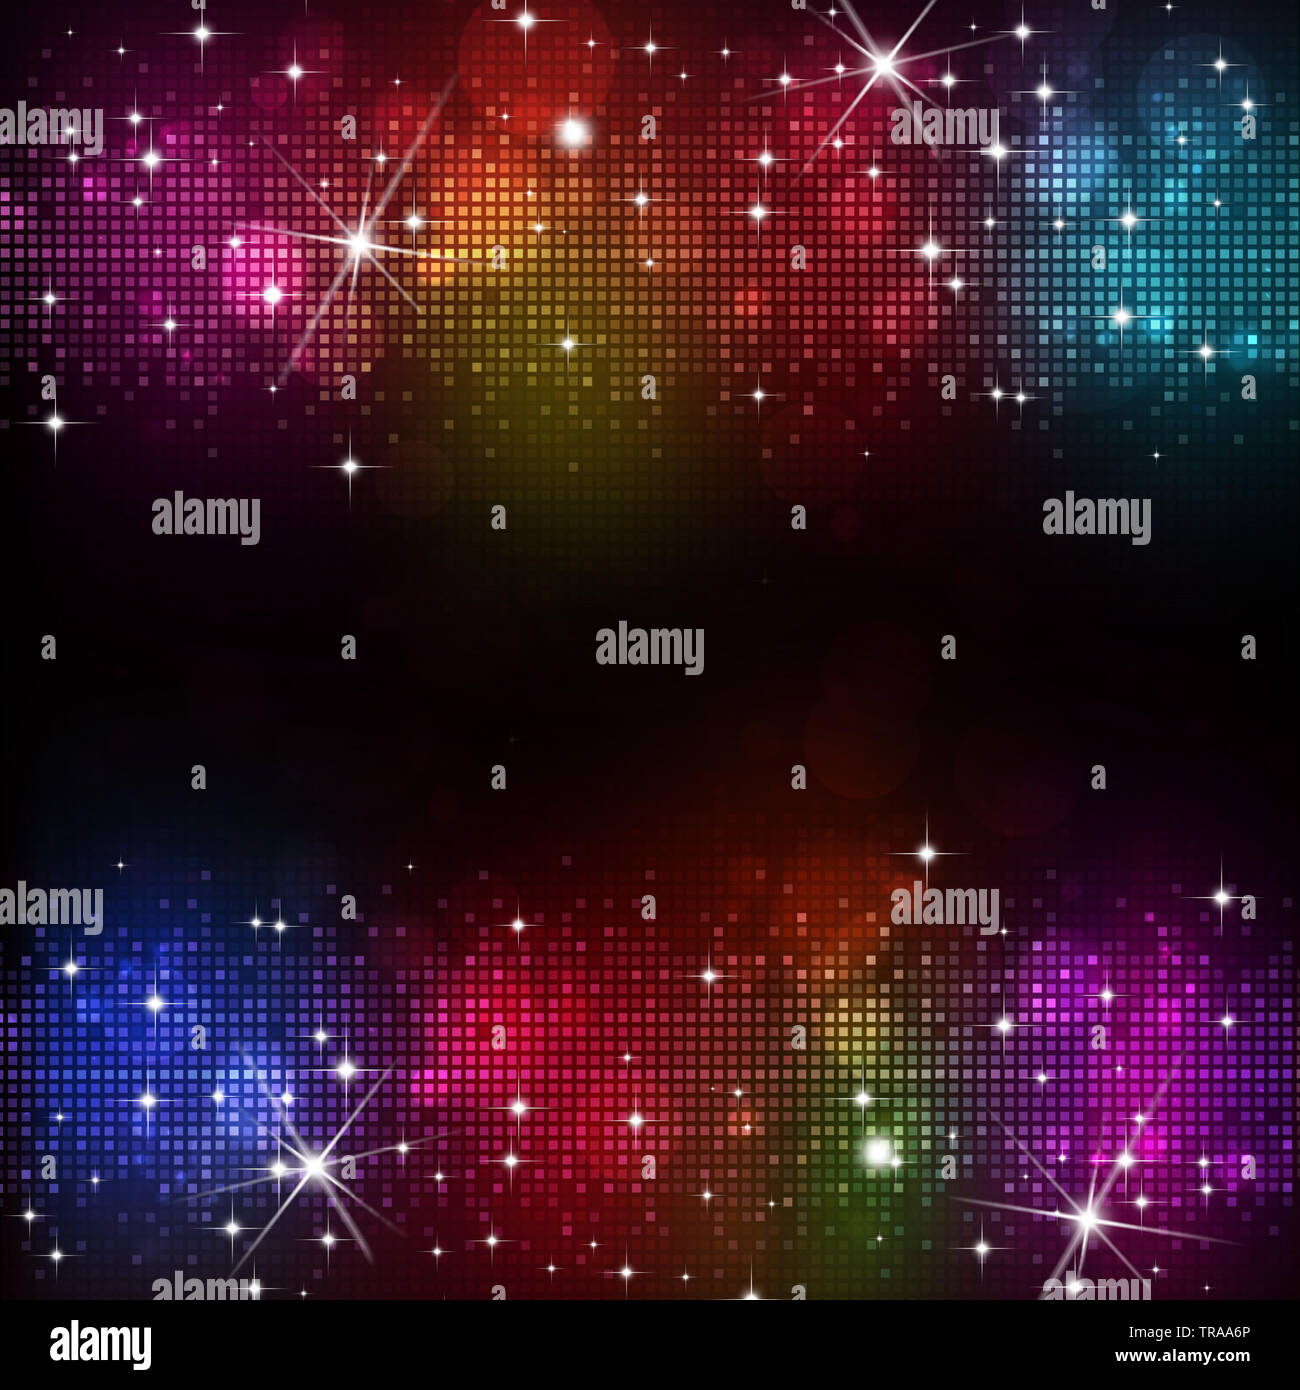 Disco party background image  CanStock